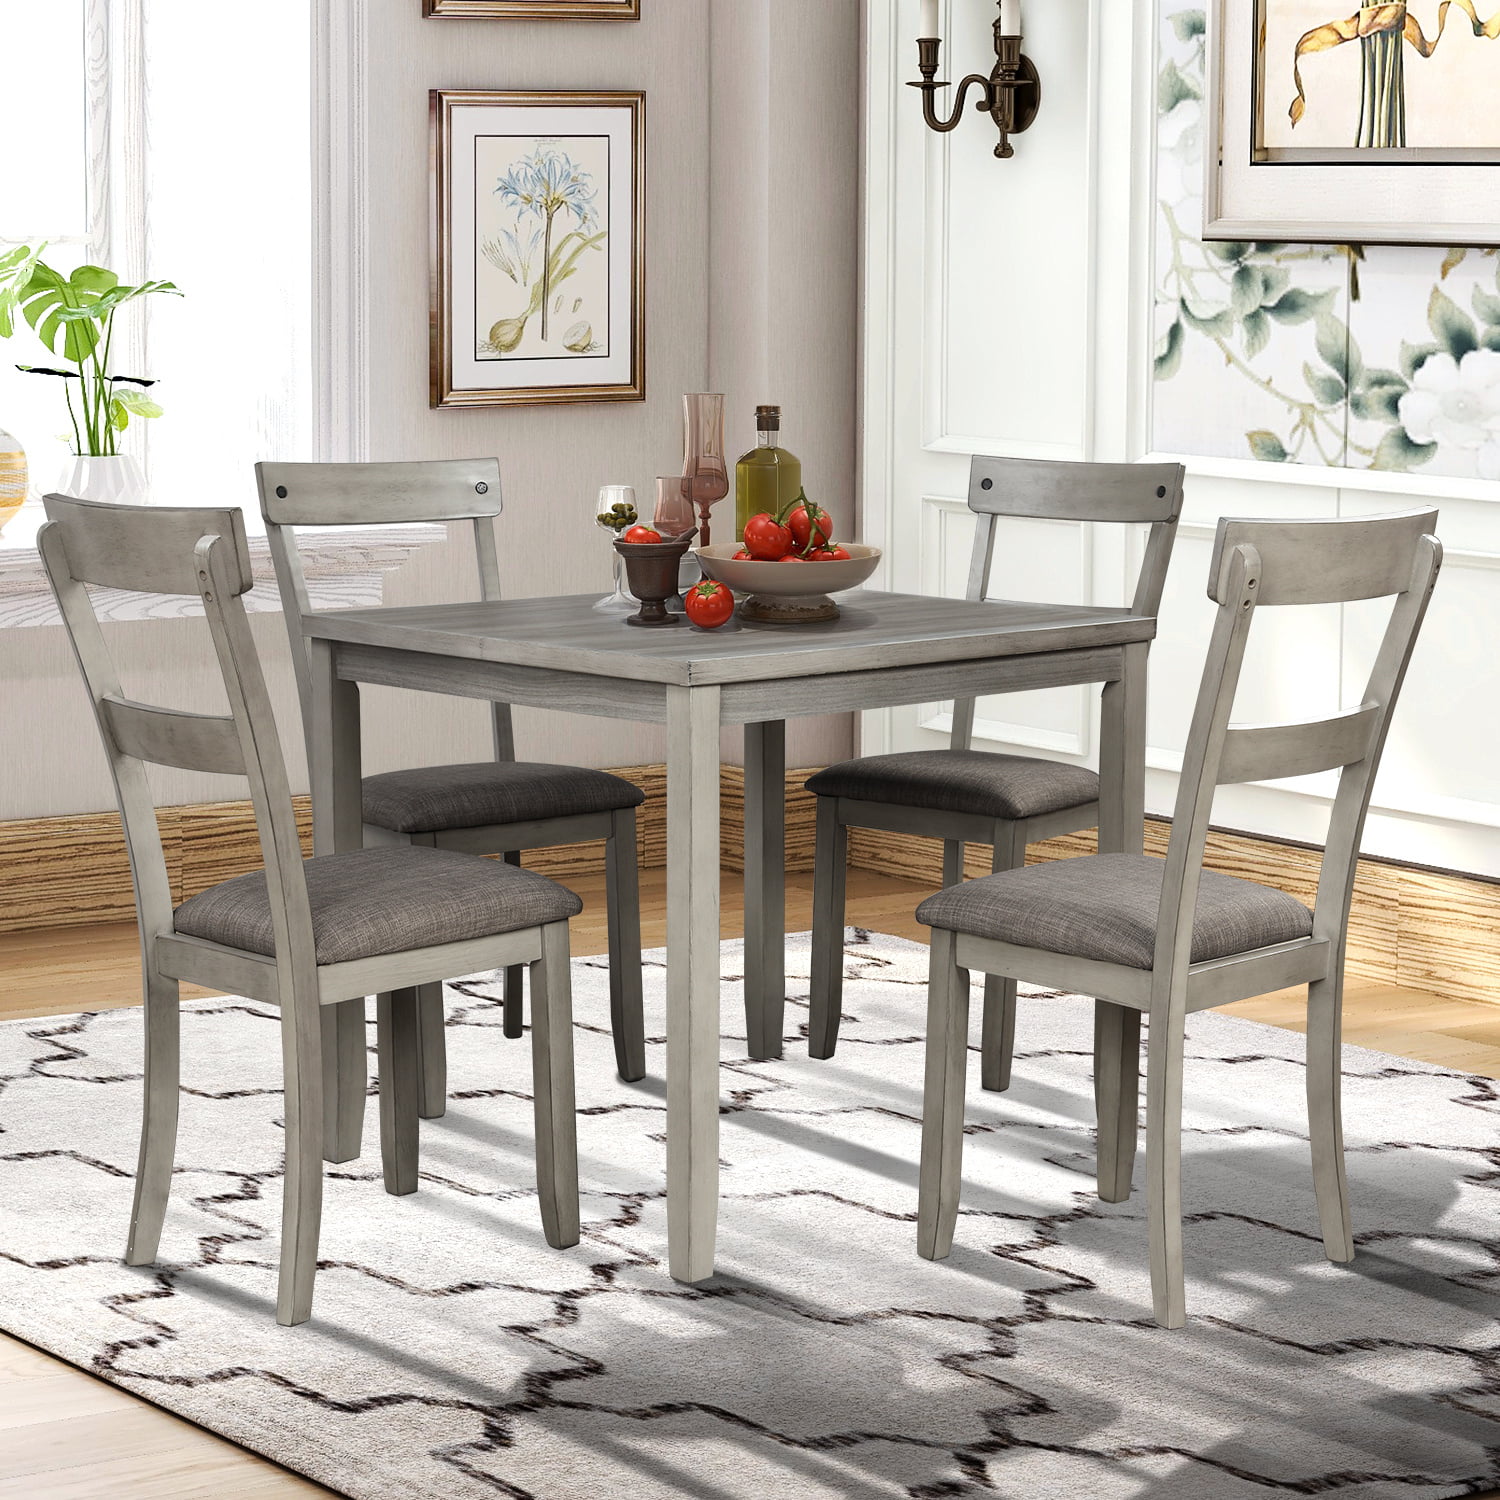 5 Piece Dining Table Set for 4 Persons, Farmhouse Wooden Kitchen Table